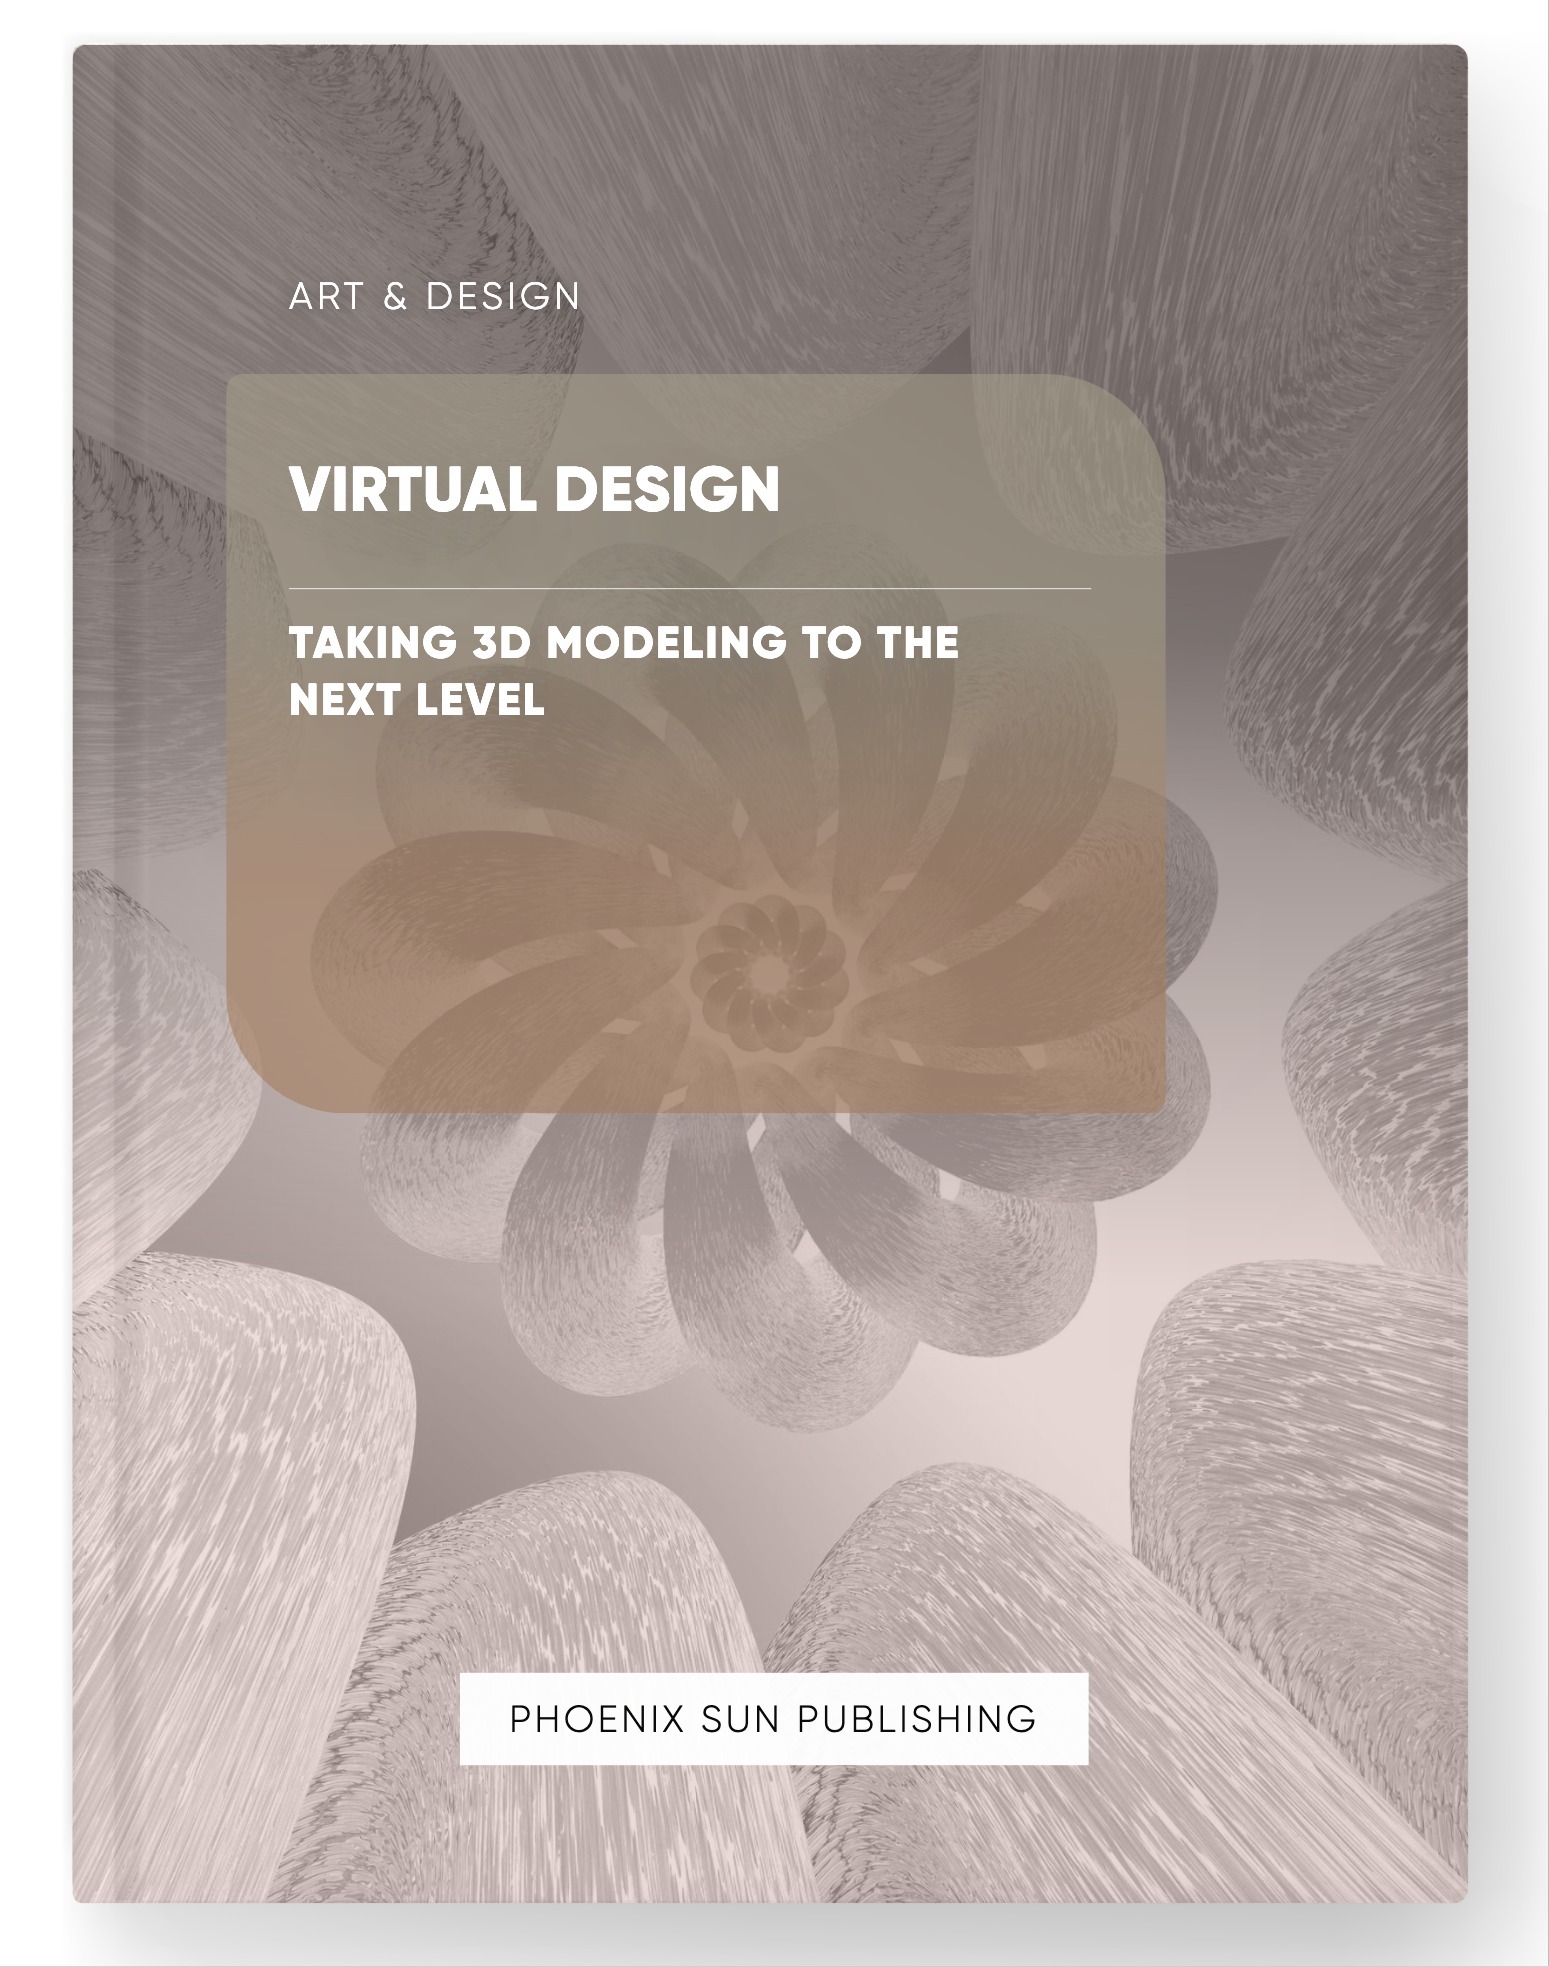 Virtual Design – Taking 3D Modeling to the Next Level